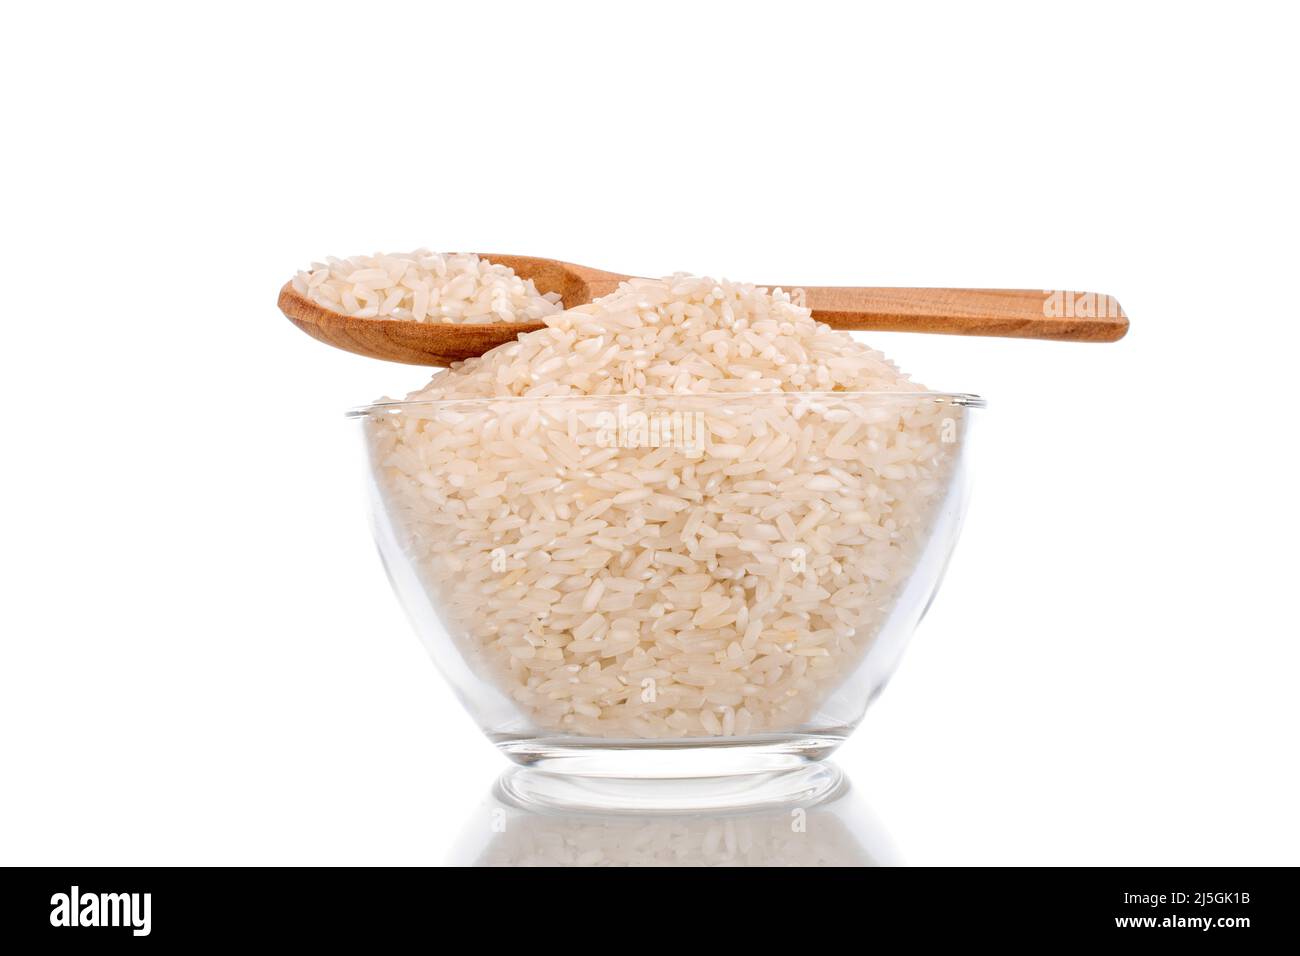 Uncooked organic rice with wooden spoon and glassware, macro, isolated on white background. Stock Photo